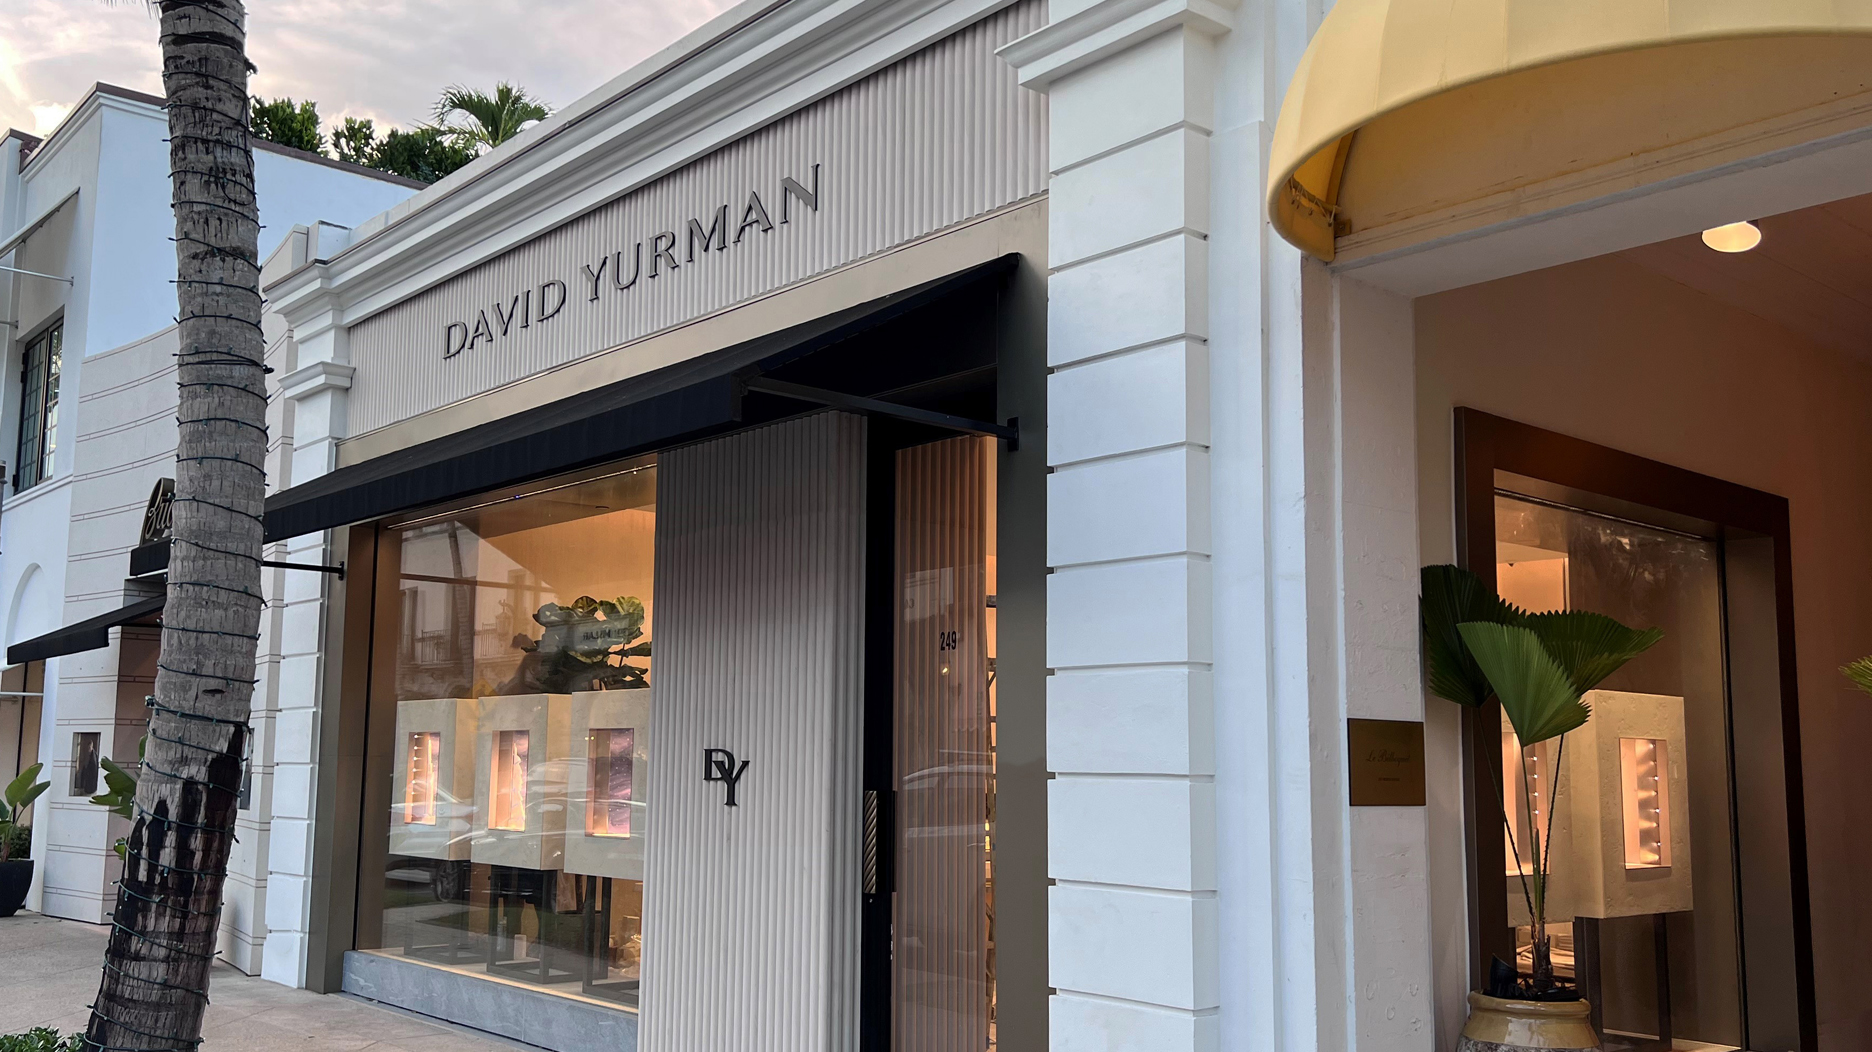 How to get to David Yurman Houston Premium Outlets by Bus or Light